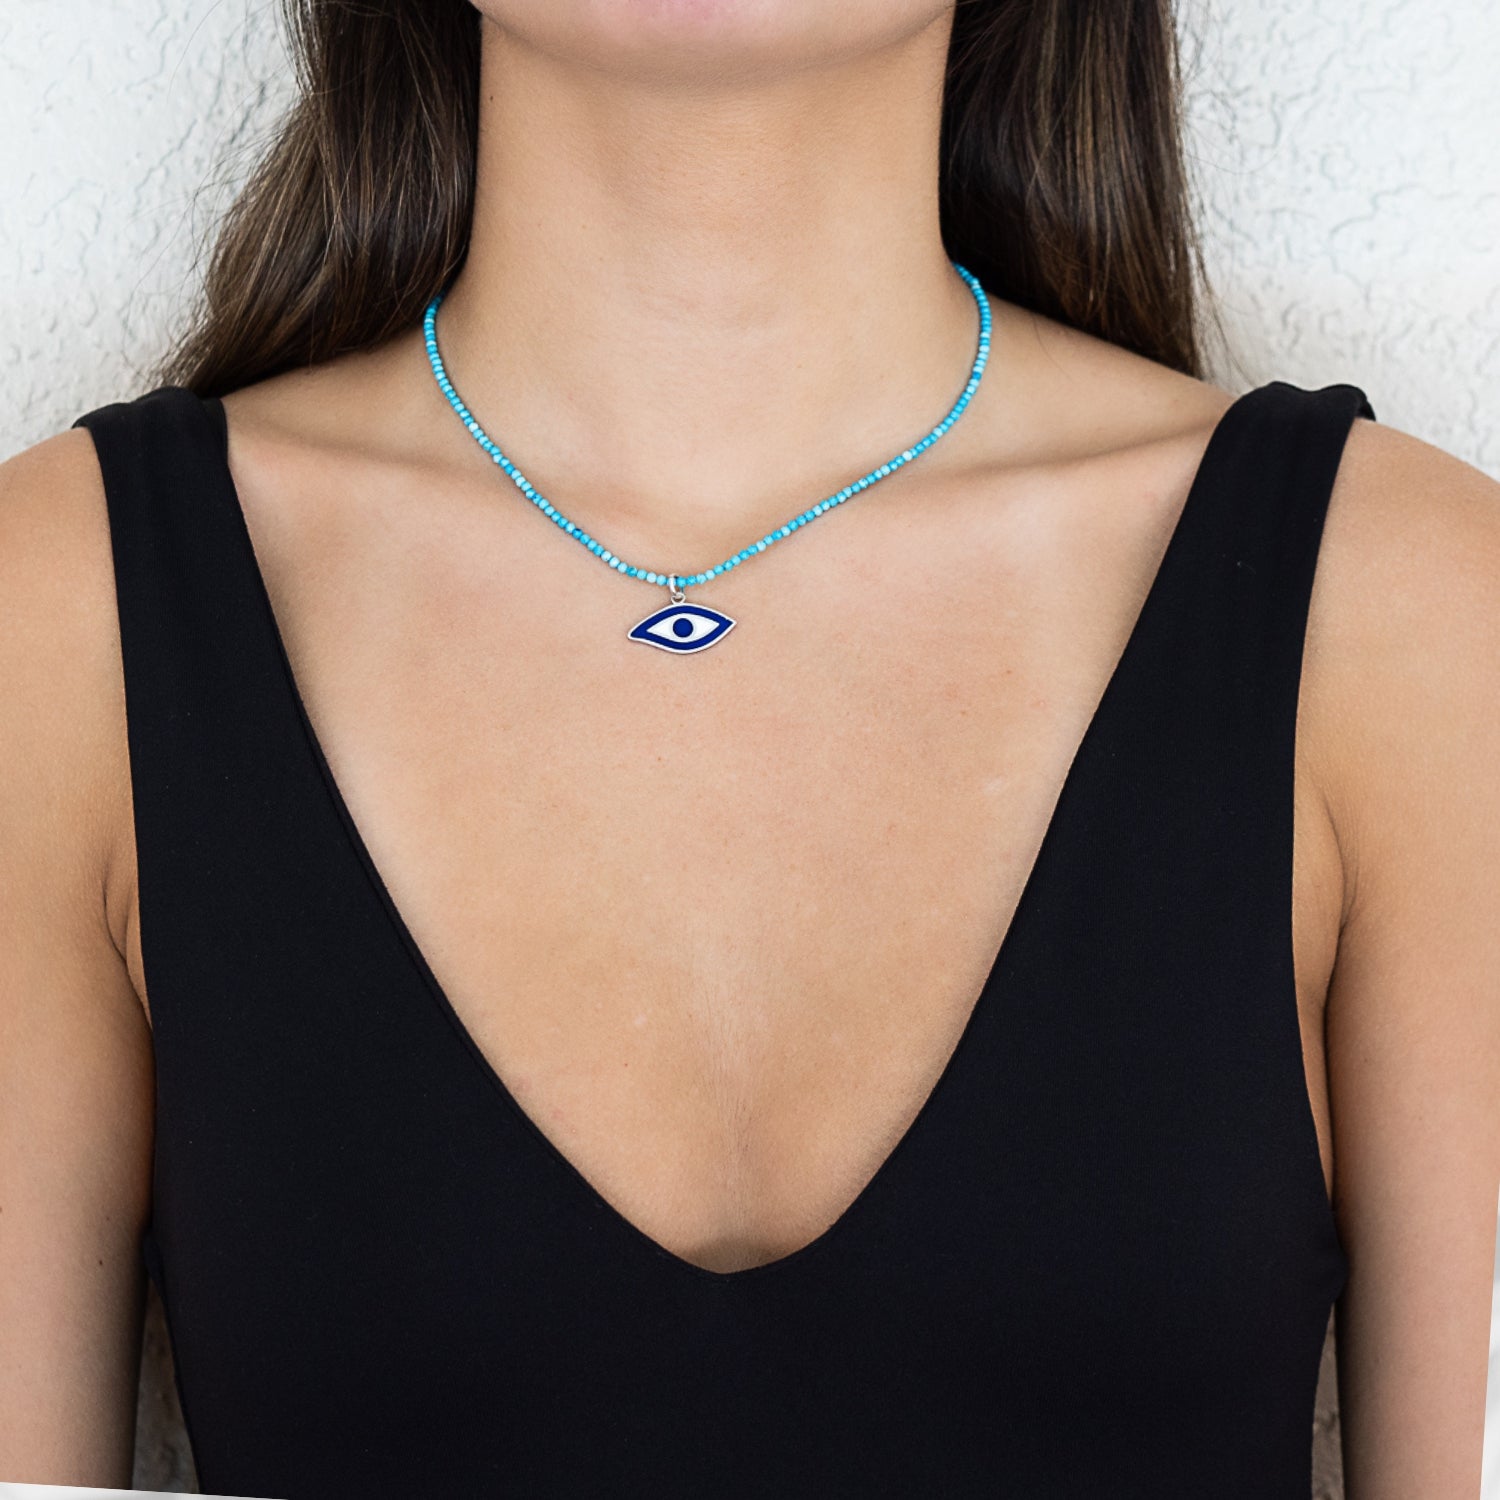 The Turquoise Evil Eye Protection Necklace beautifully worn by the model, showcasing its unique design and vibrant colors.